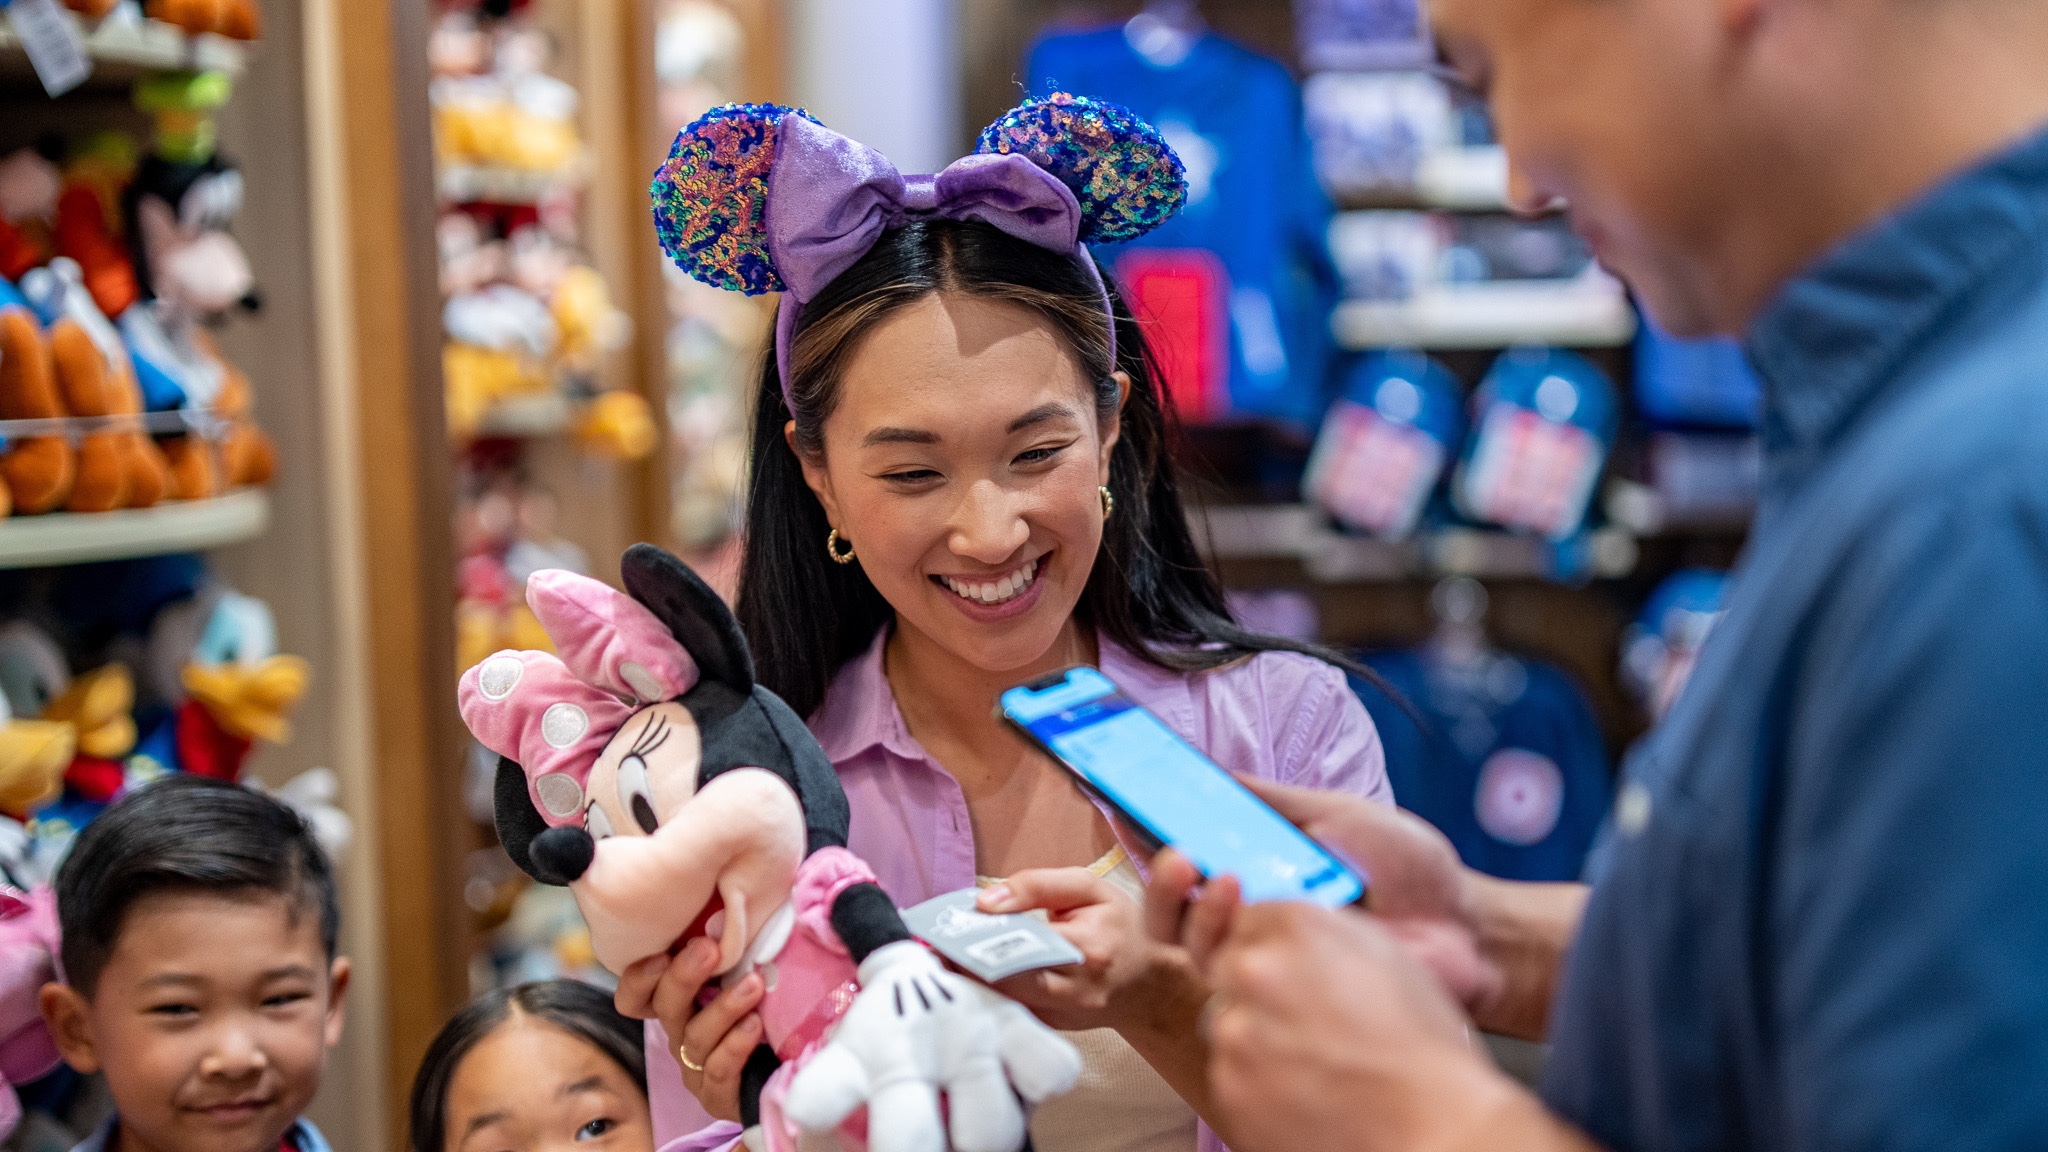 Disneyland App Continues to Add More Magic